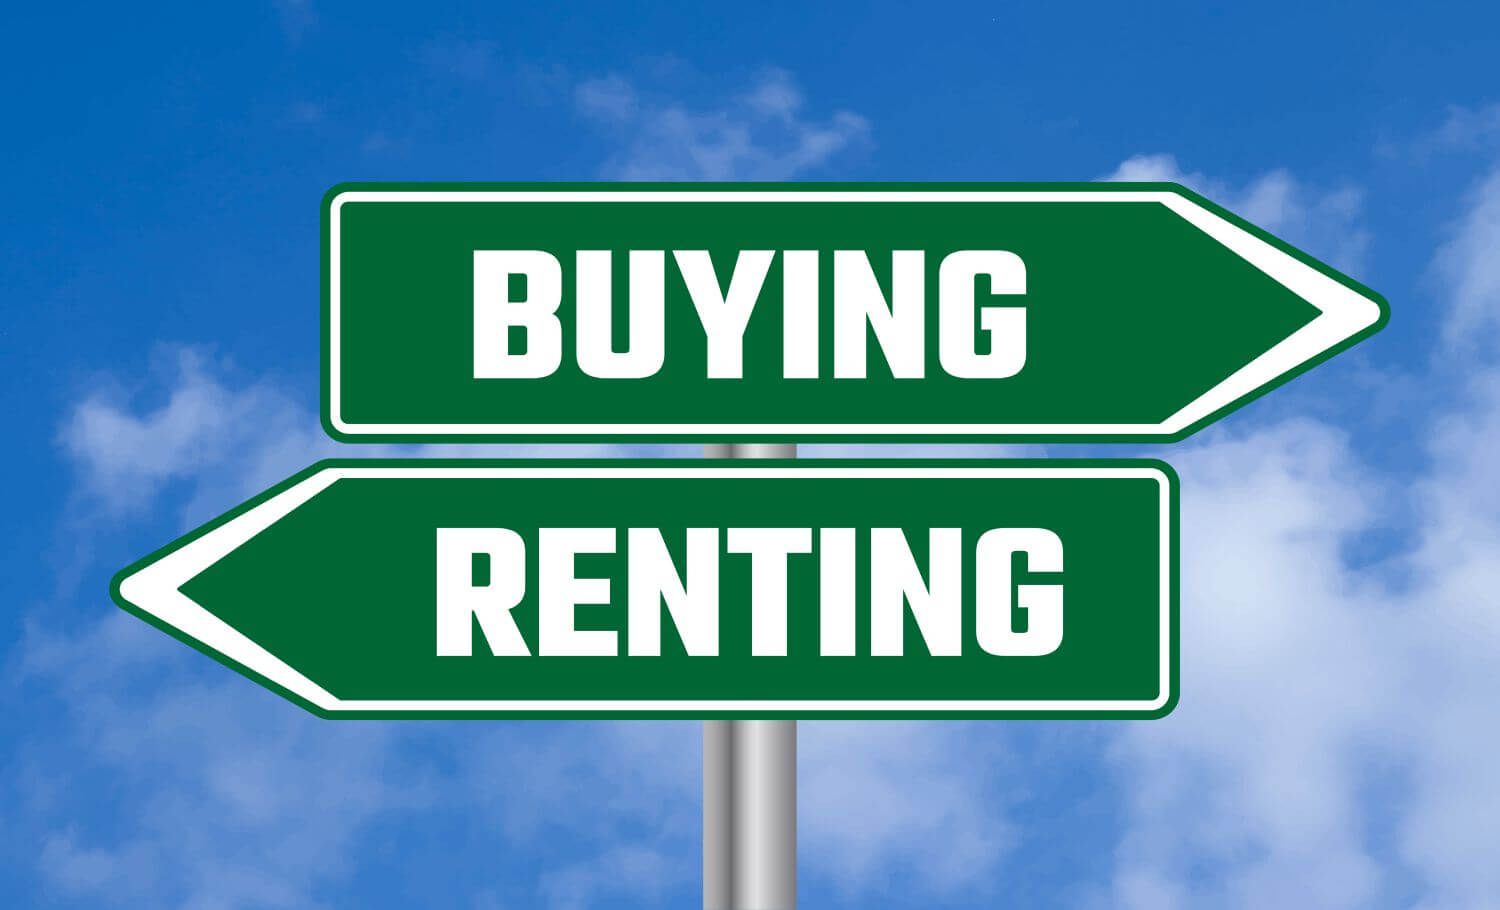 rent or buy a home